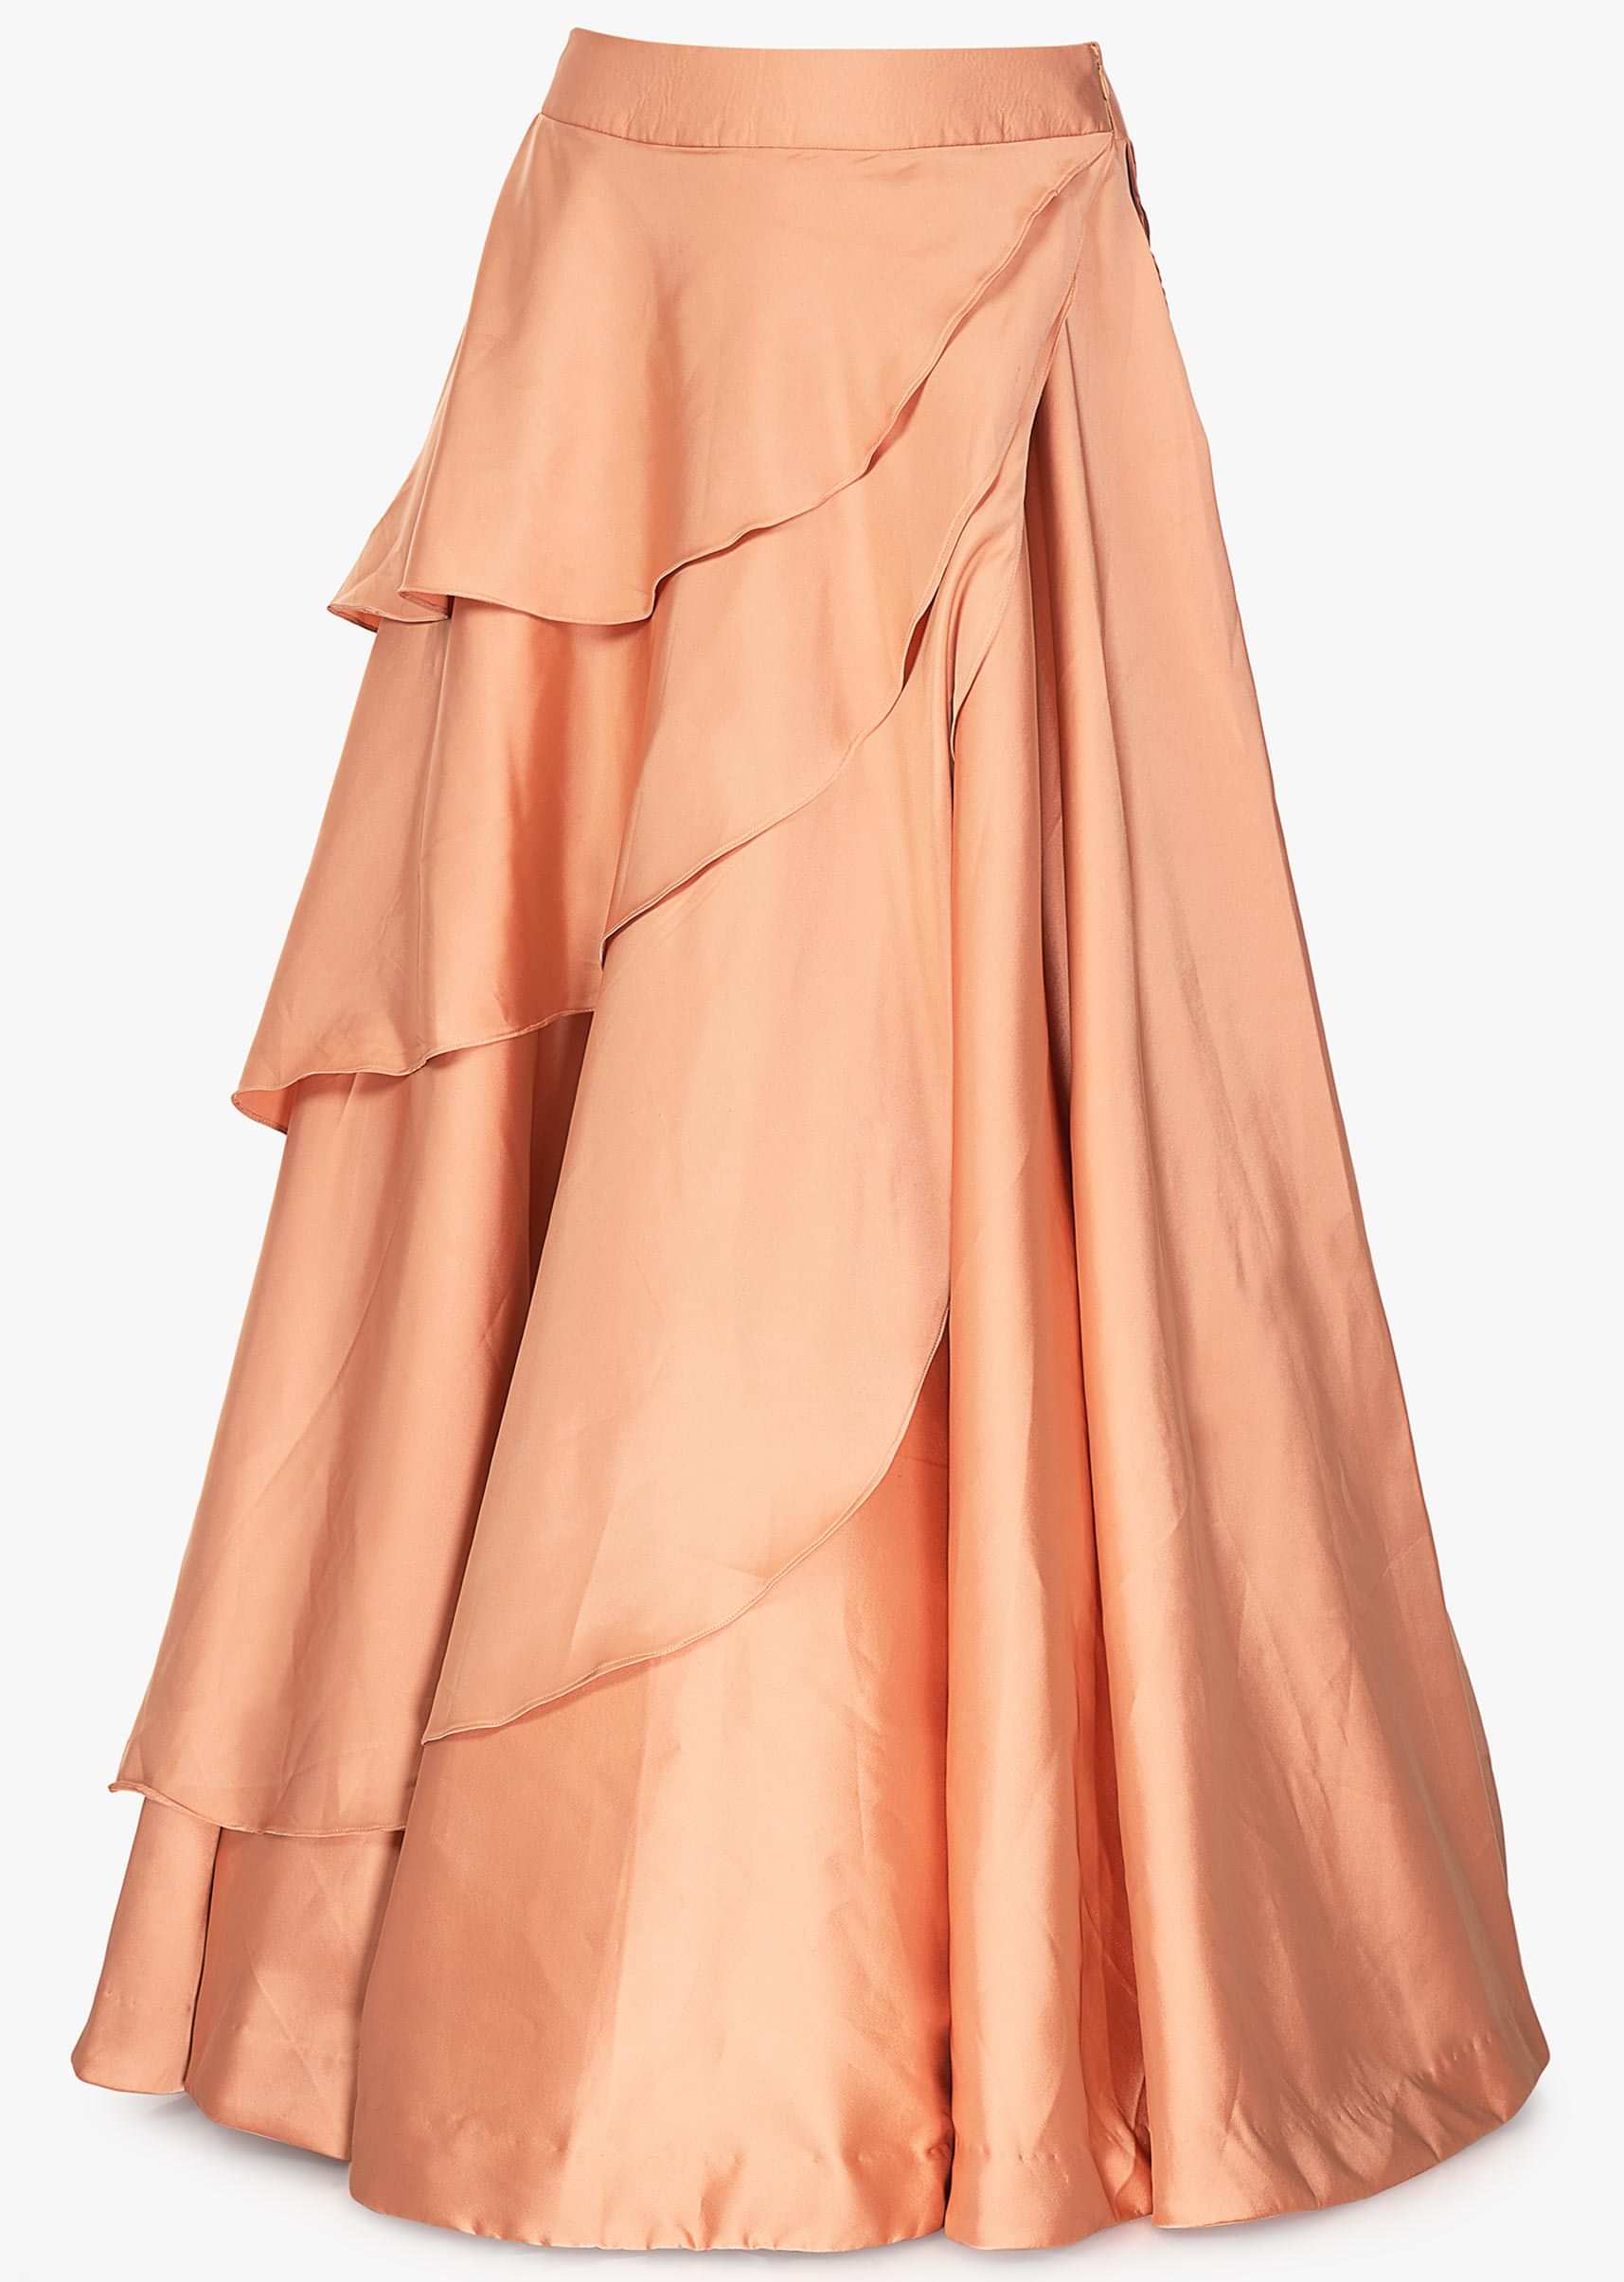 Cold shoulder peach crop top with layered satin skirt